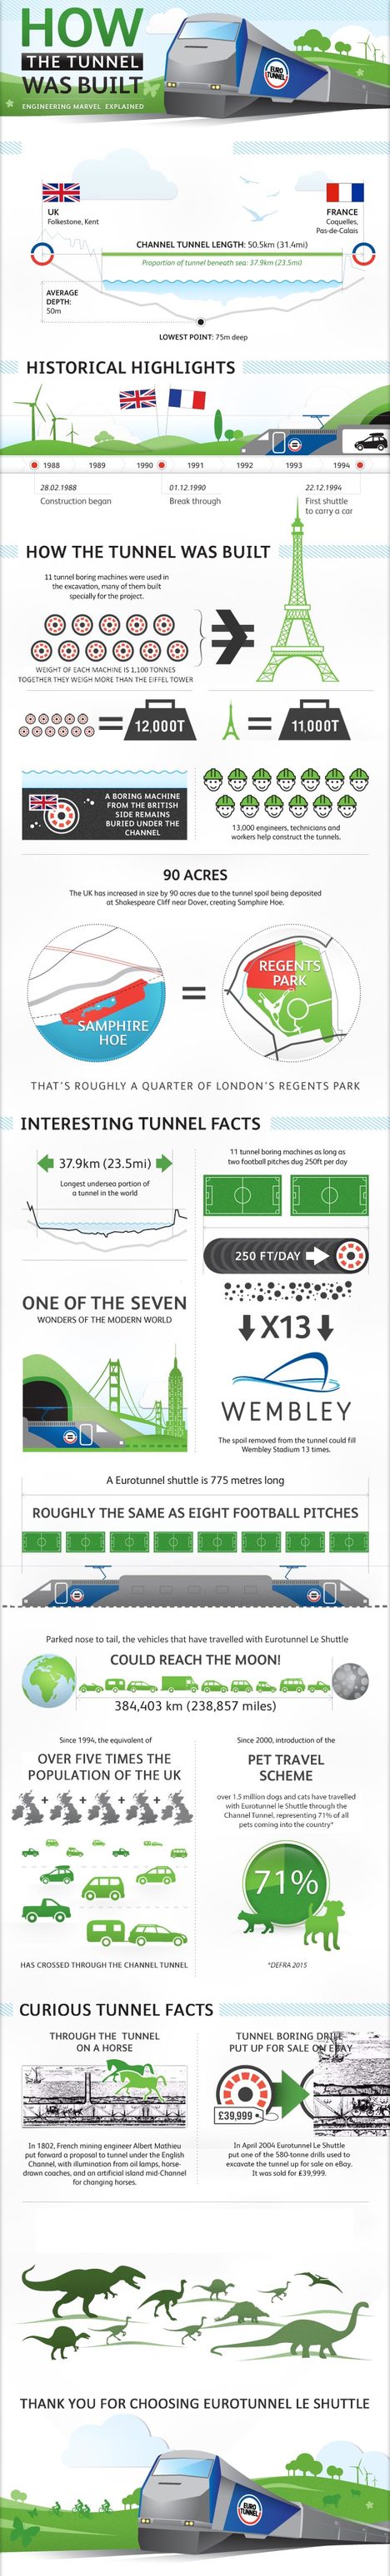 How the Channel Tunnel was Built